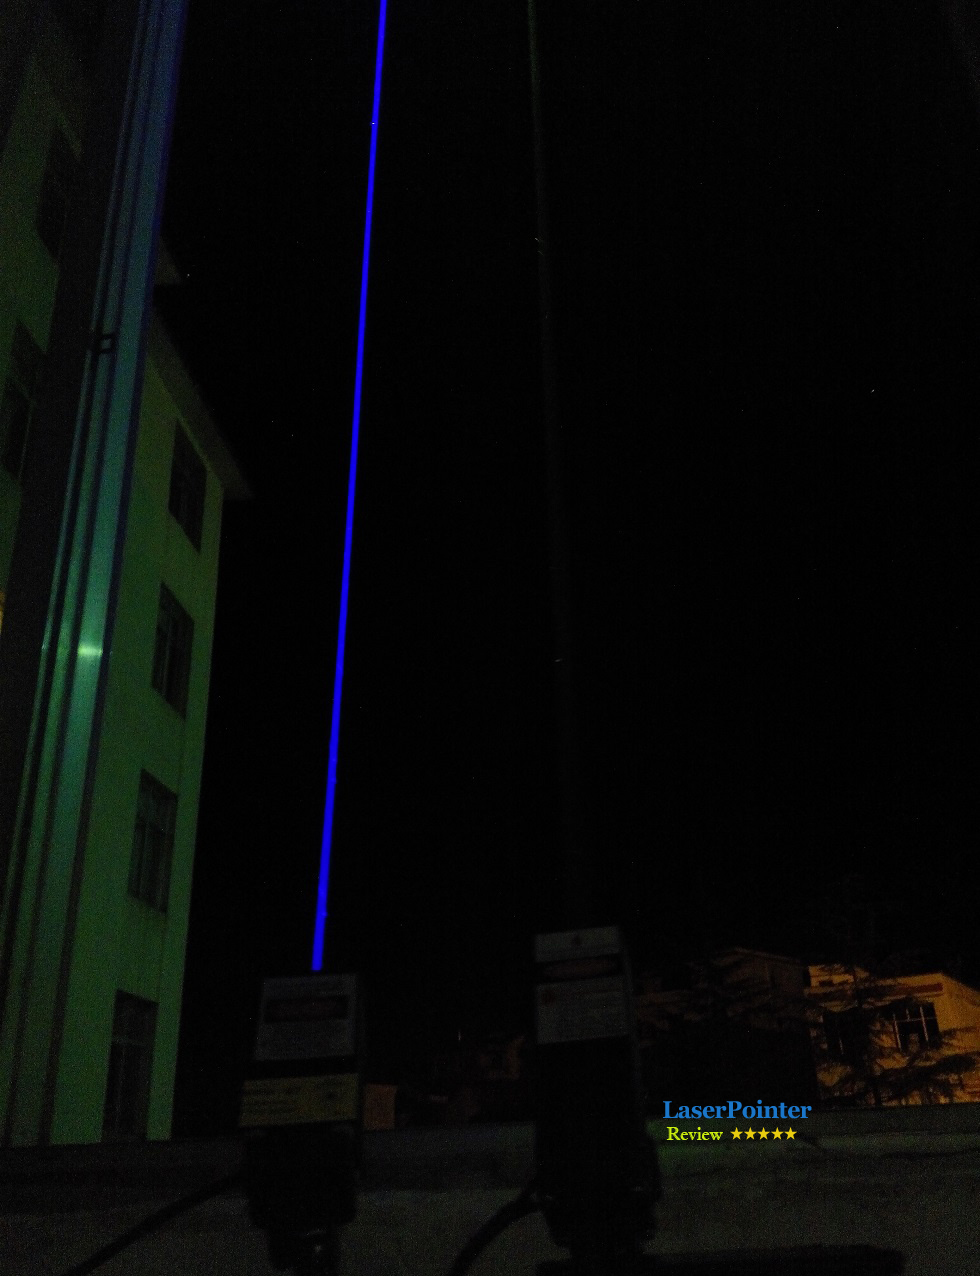 The Beam Of 445nm 2500mW And 532nm 200mW Laser